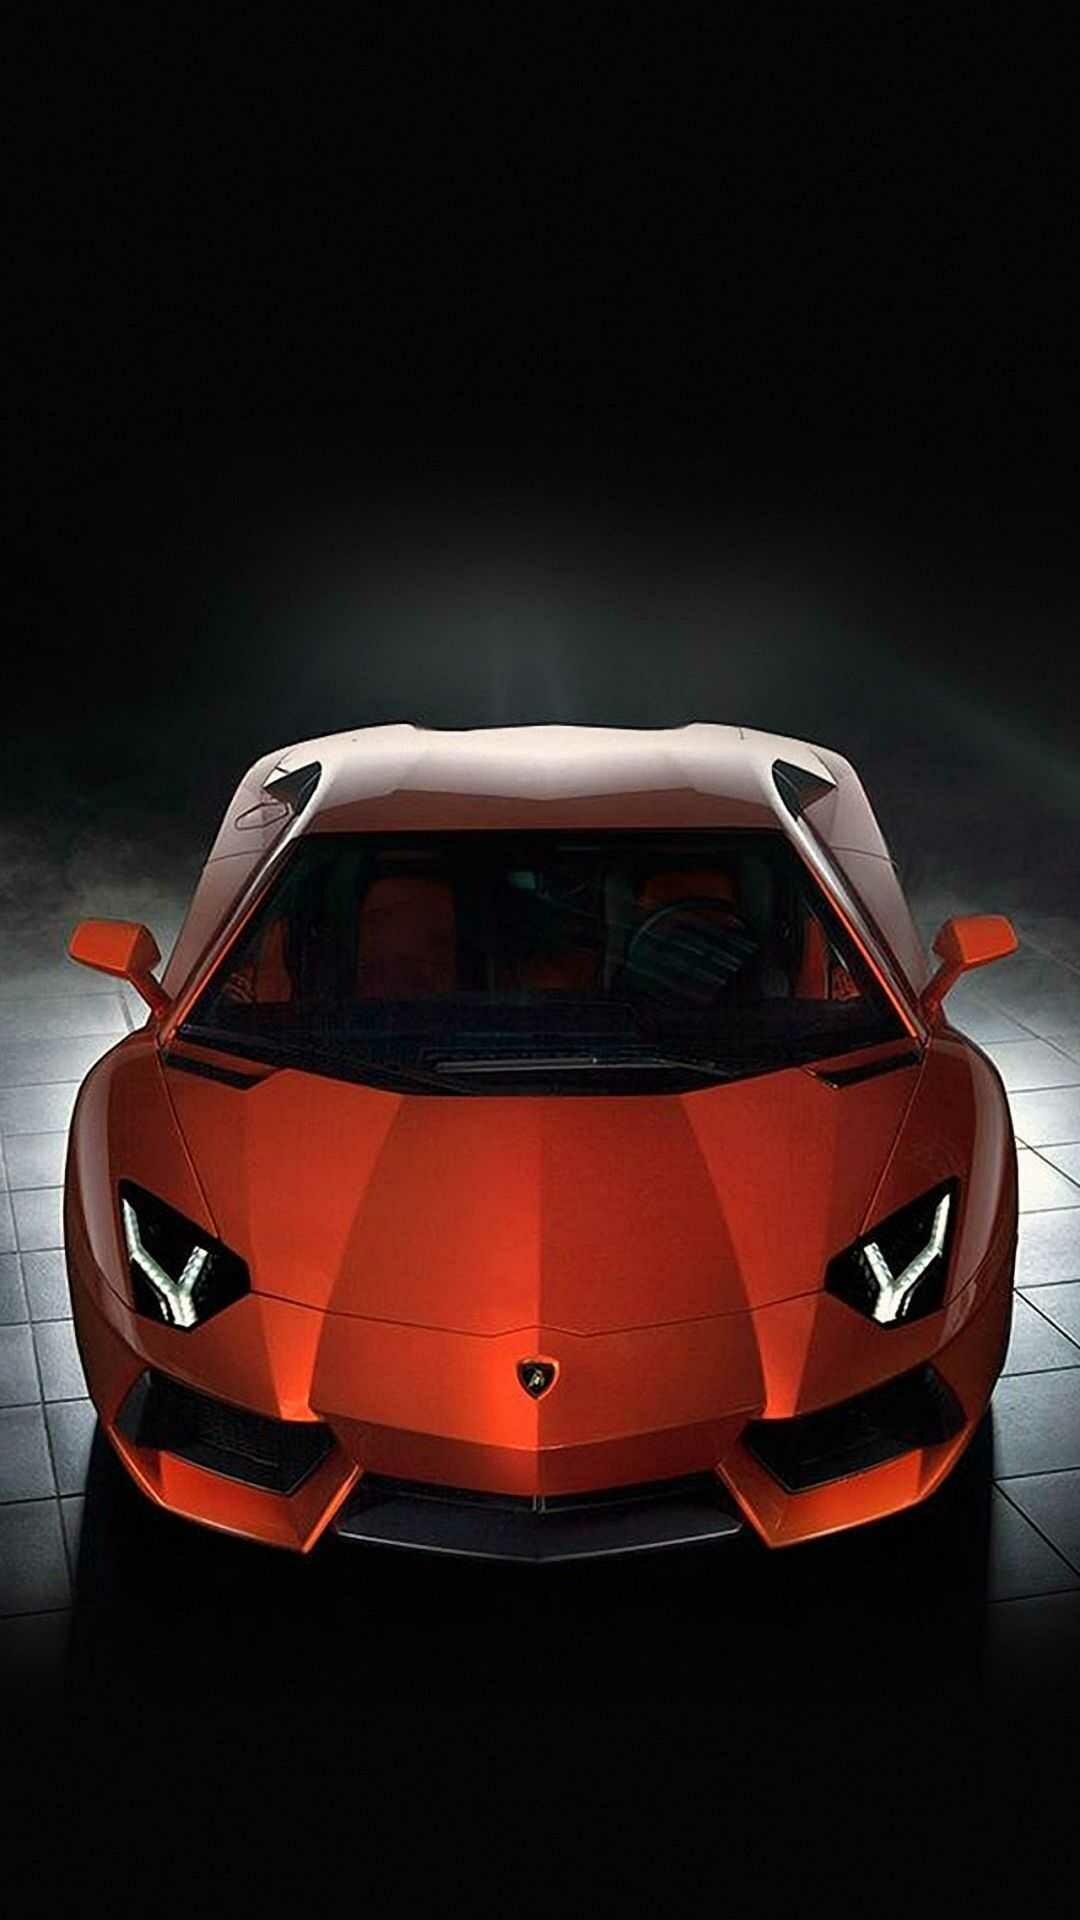 Lamborghini: The company was noted for using a rear mid-engine, rear-wheel drive layout, Aventador. 1080x1920 Full HD Wallpaper.